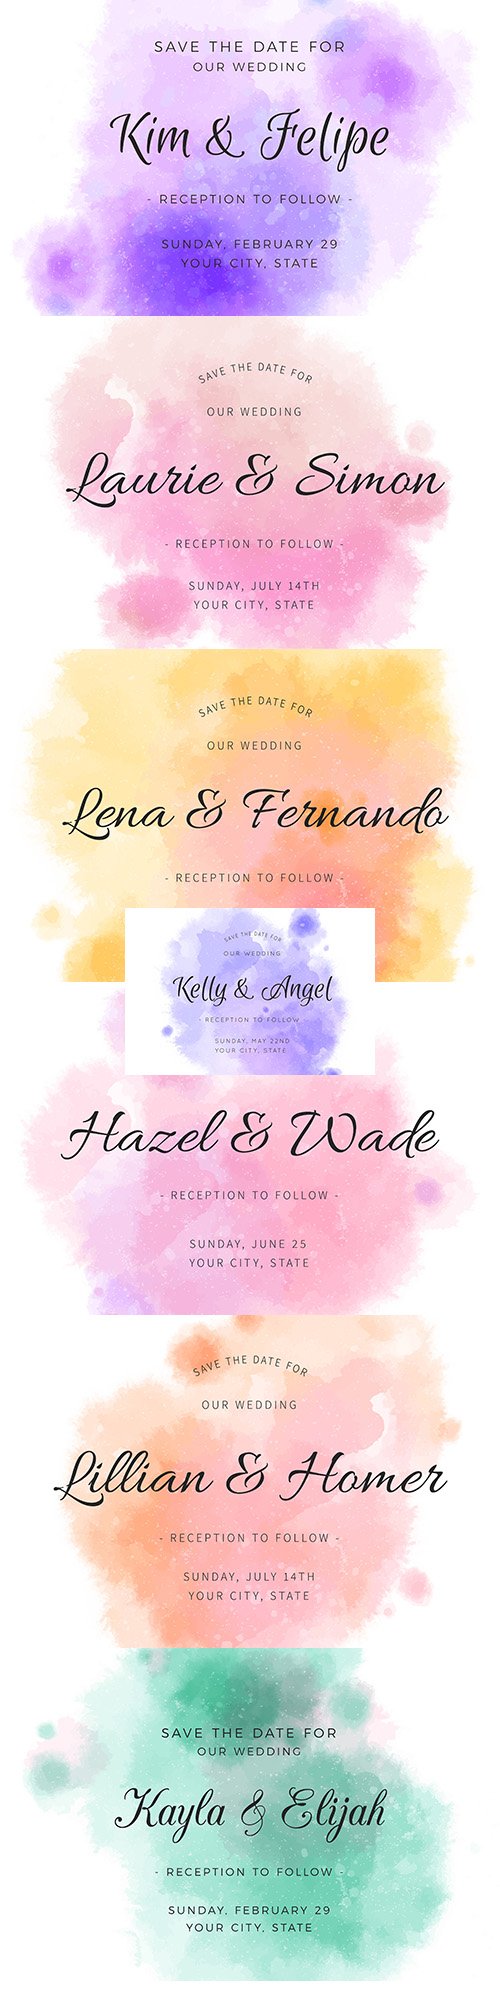 Wedding invitations with gradient watercolour spots